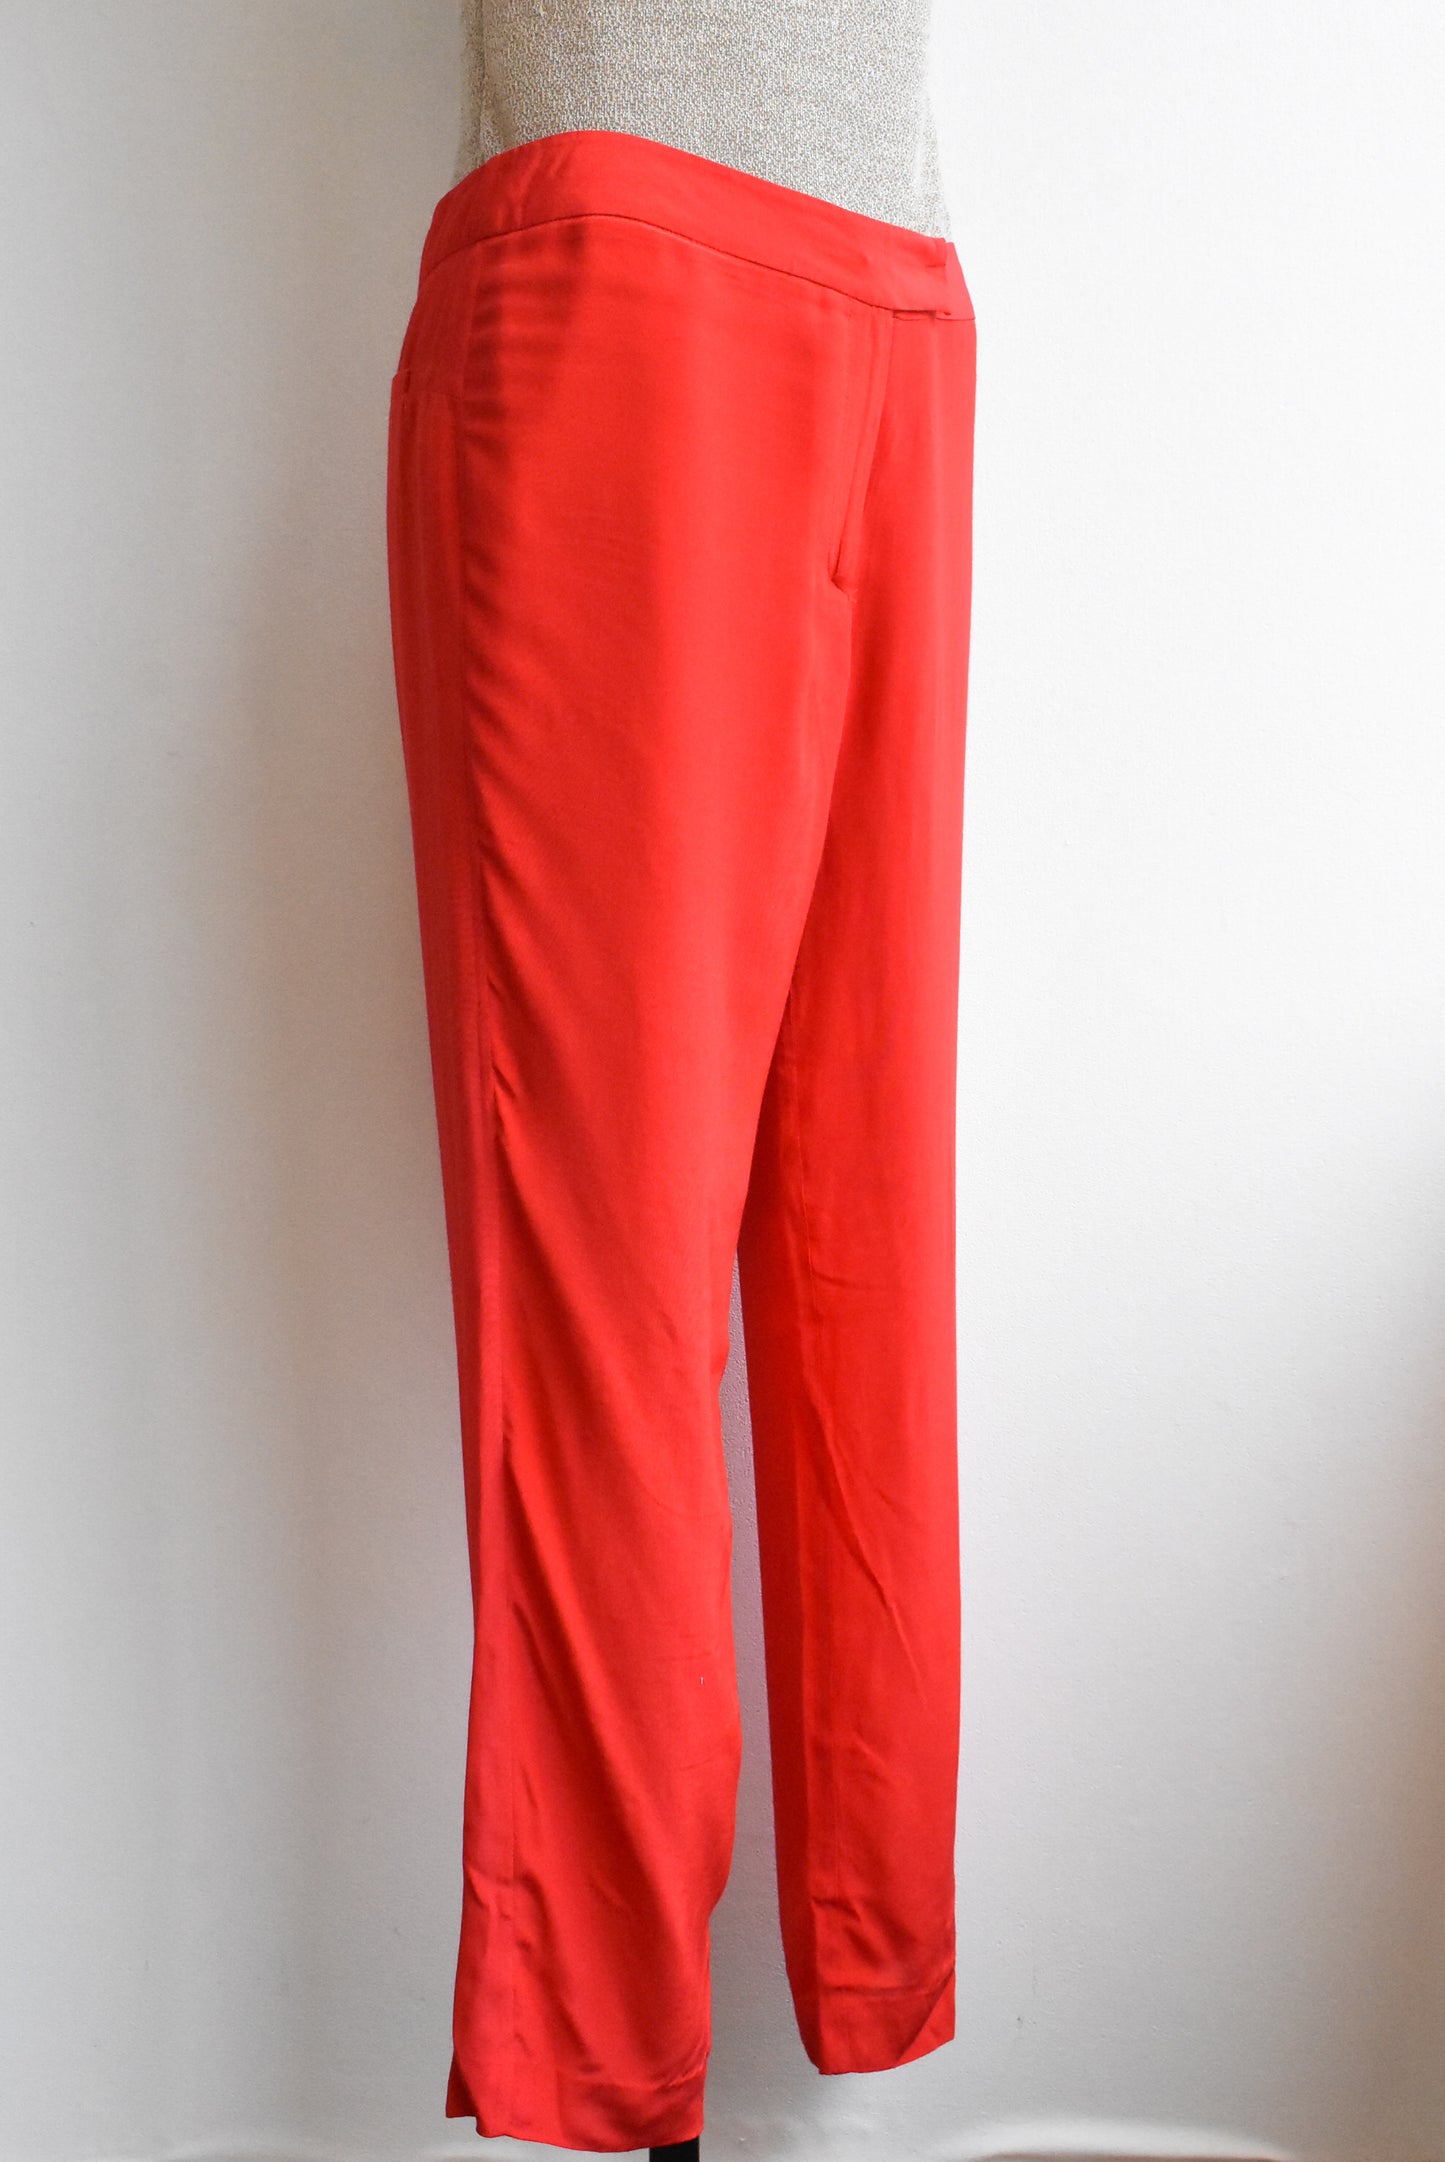 Trelise Cooper red dress pants, size 8